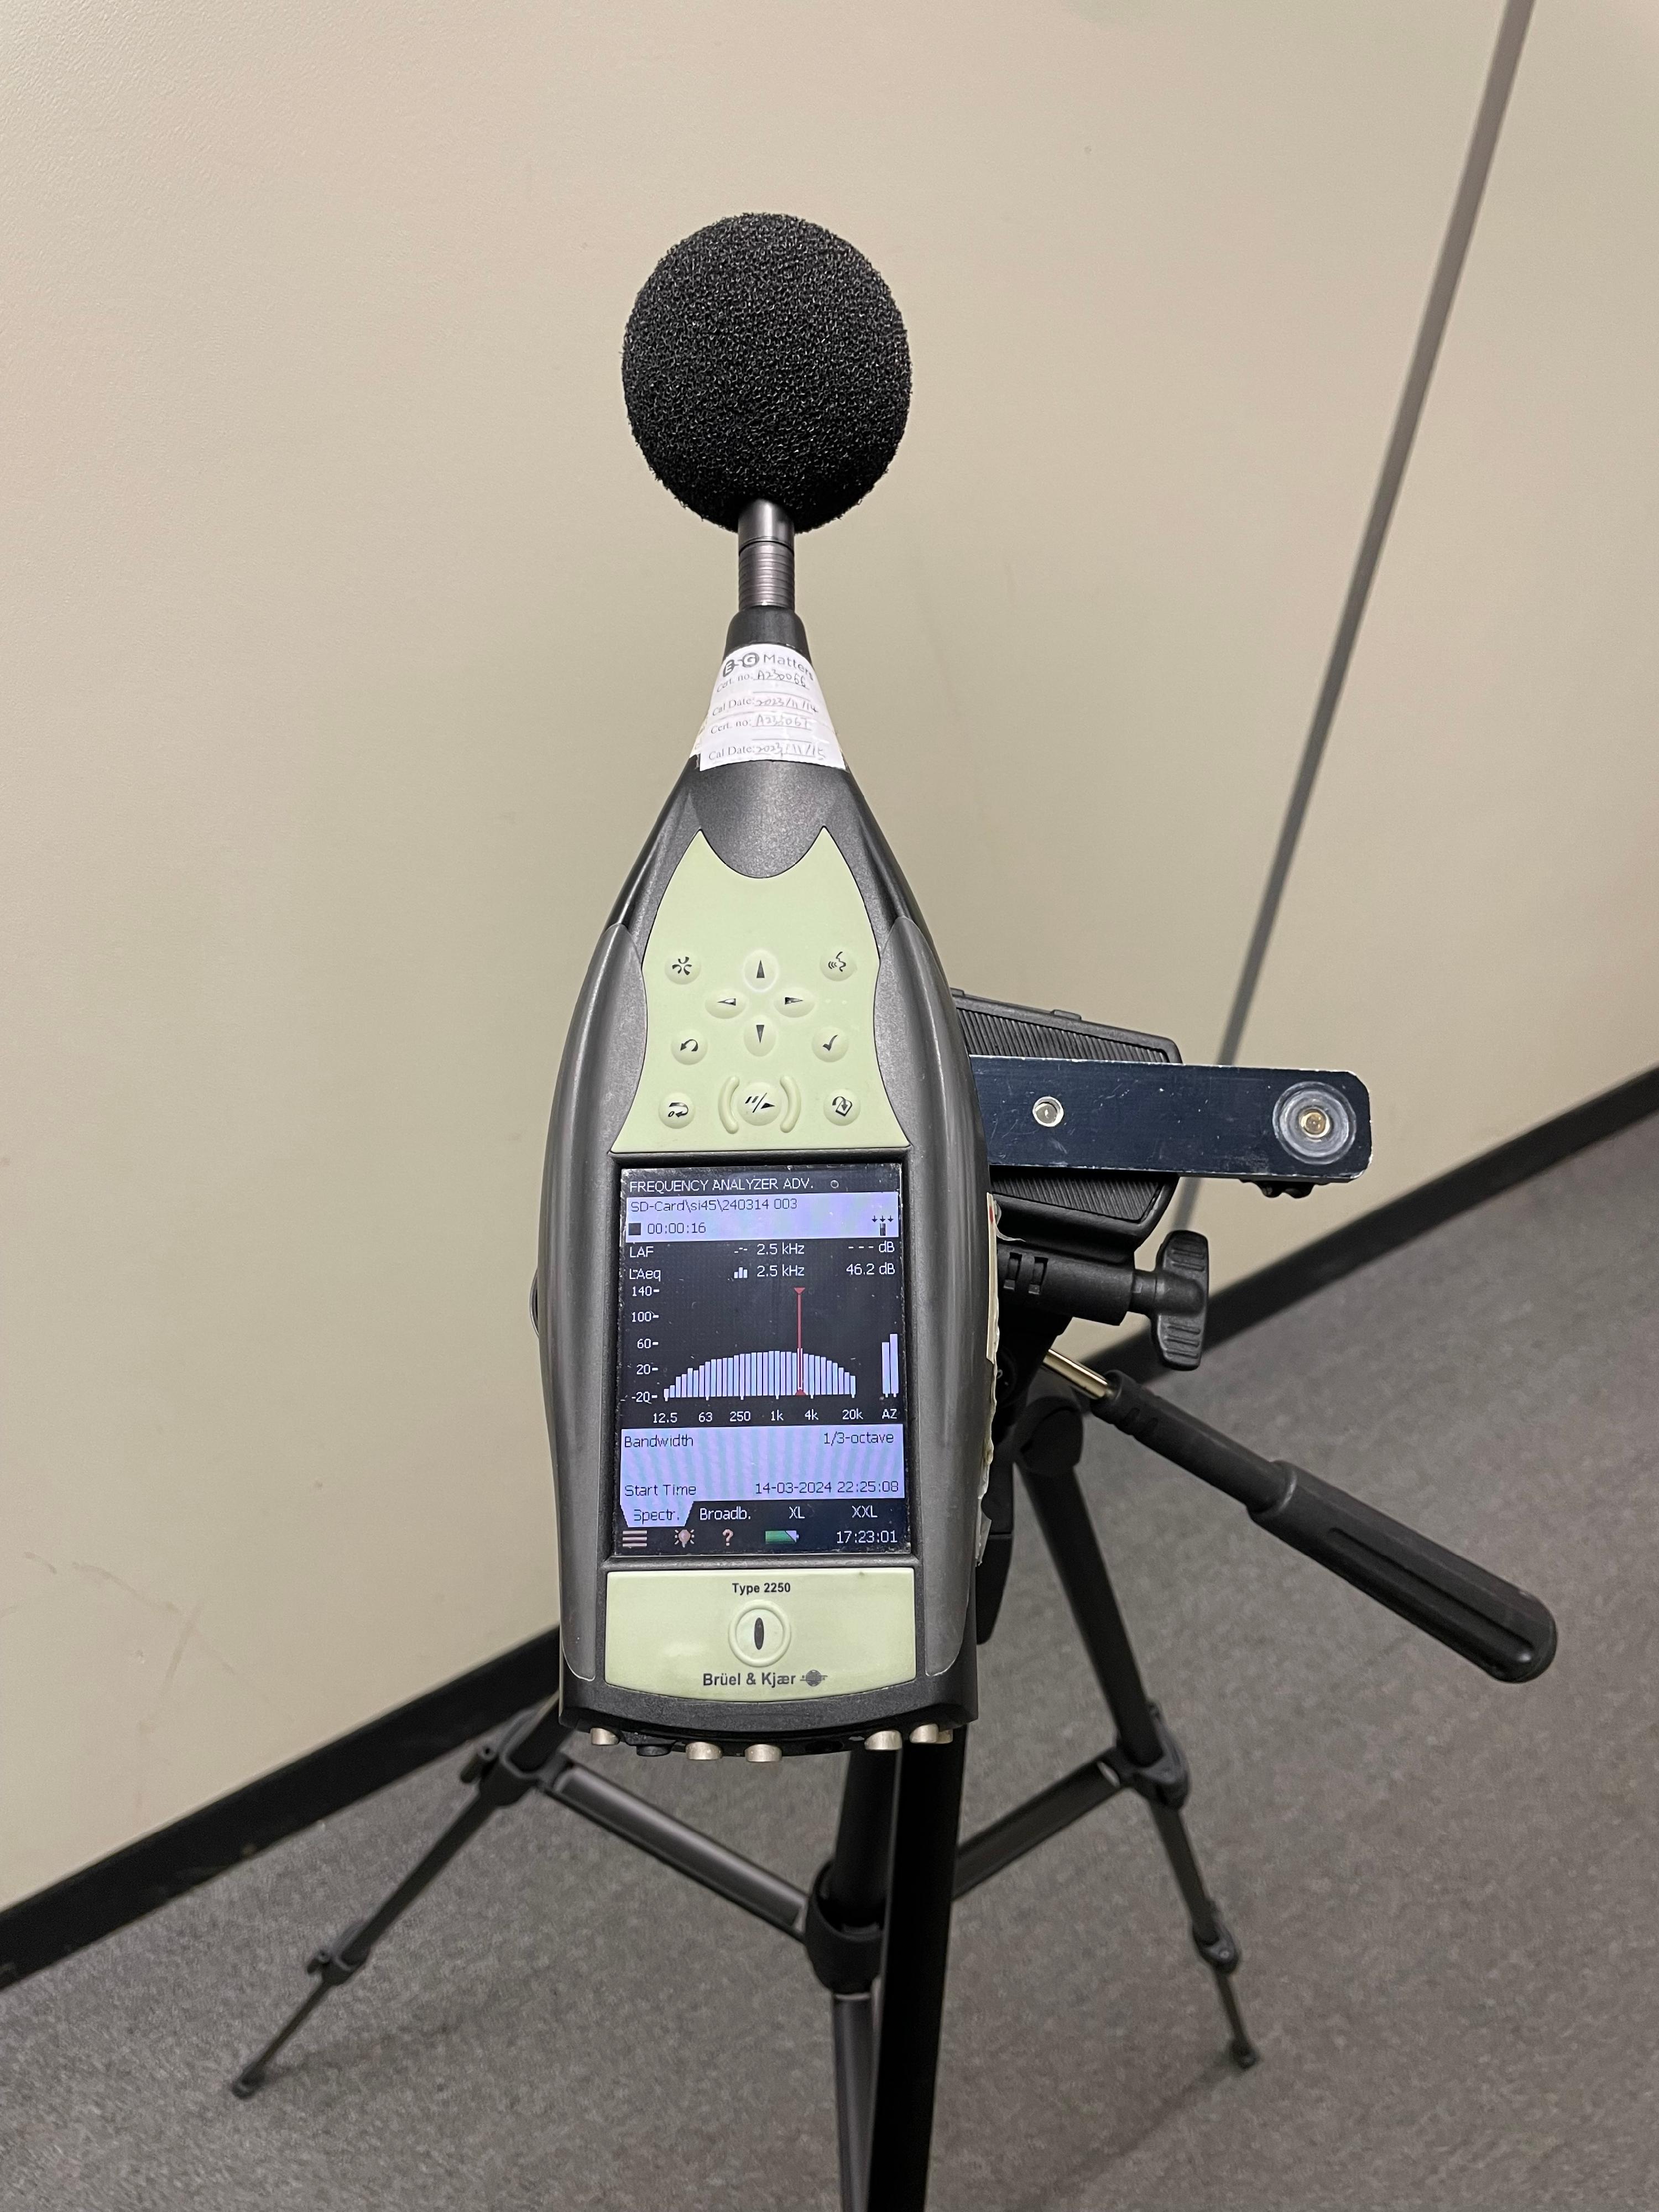 The Environmental Protection Department announced today (March 15) a case in which acoustic cameras were used to successfully track down an unknown noise source. Photo shows acoustic camera showing the concerned high-frequency noise (peak frequency 2.5kHZ) matched with that recorded by sound level metre, ascertained that the location of the source identified by the acoustic camera is the source of the concerned high-frequency noise.